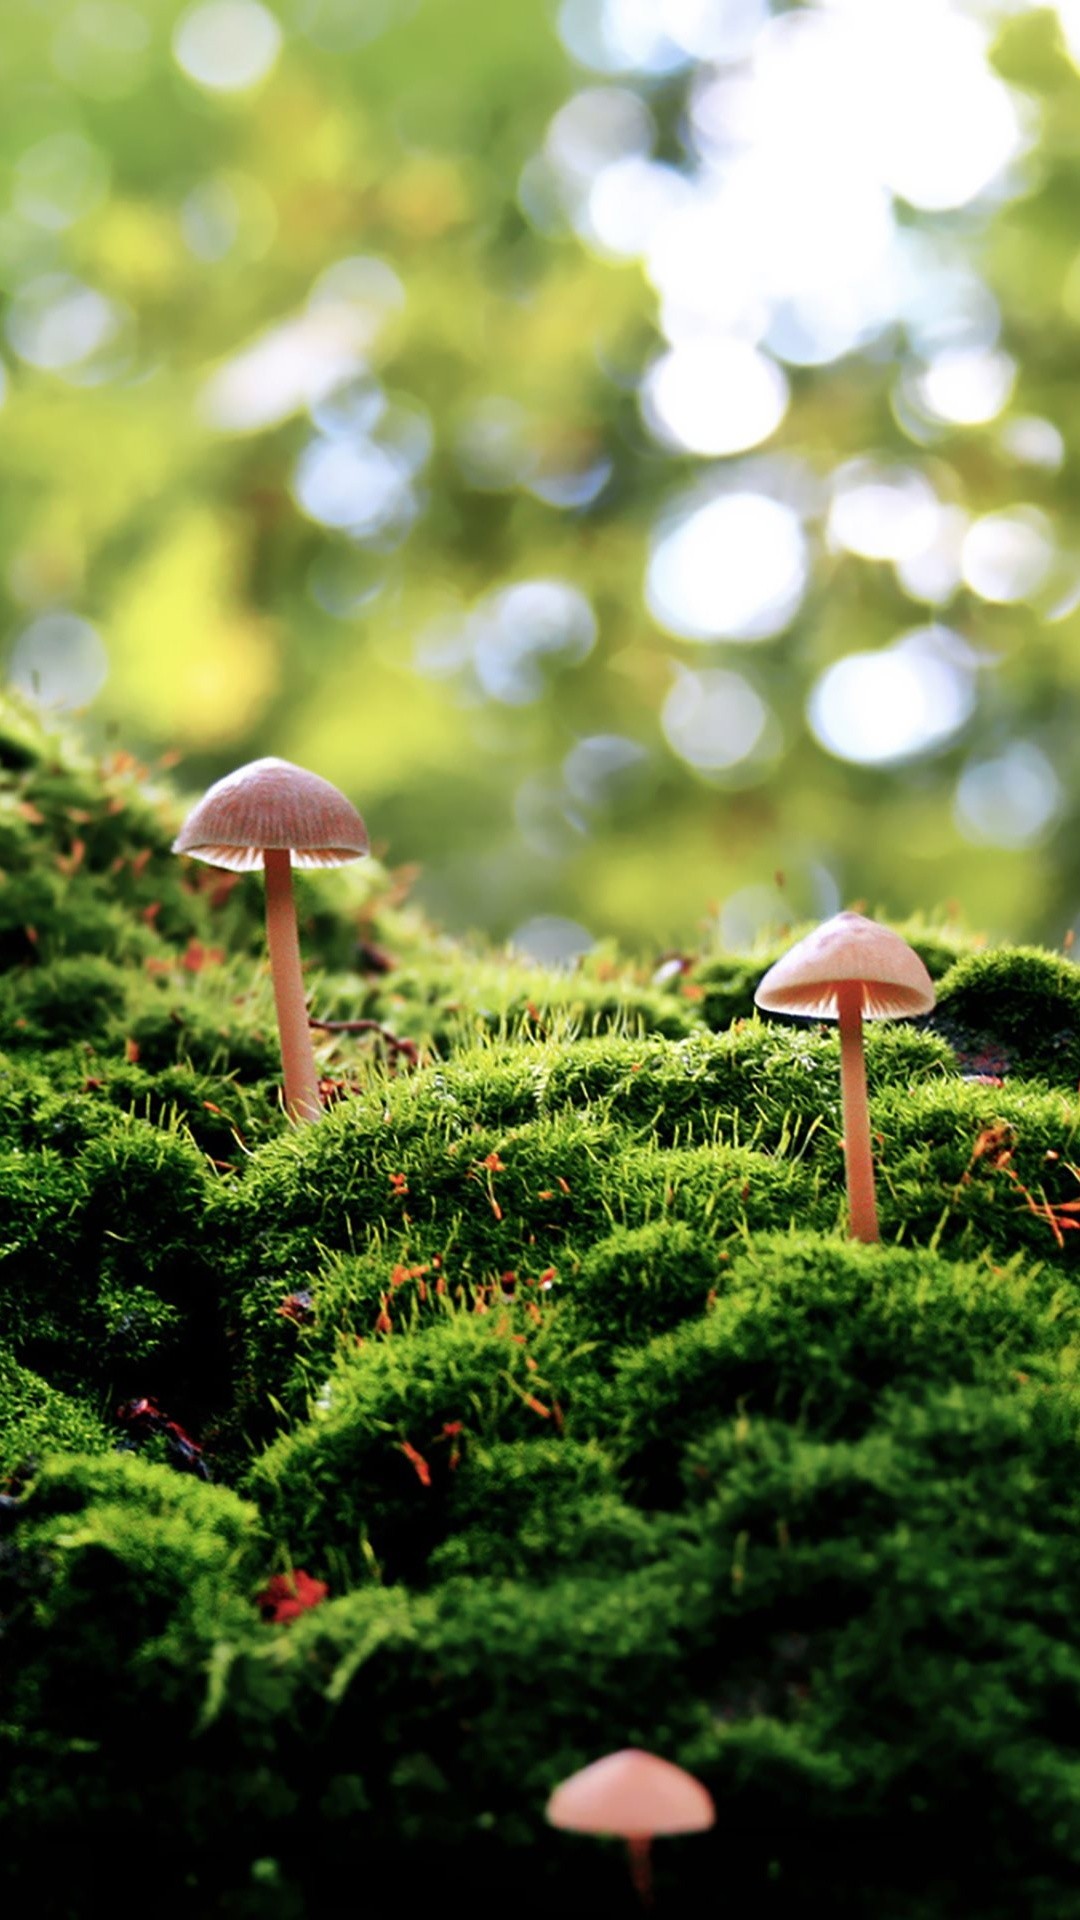 1080x1920 Mushrooms and Moss Wallpaper found on wallpapers for me